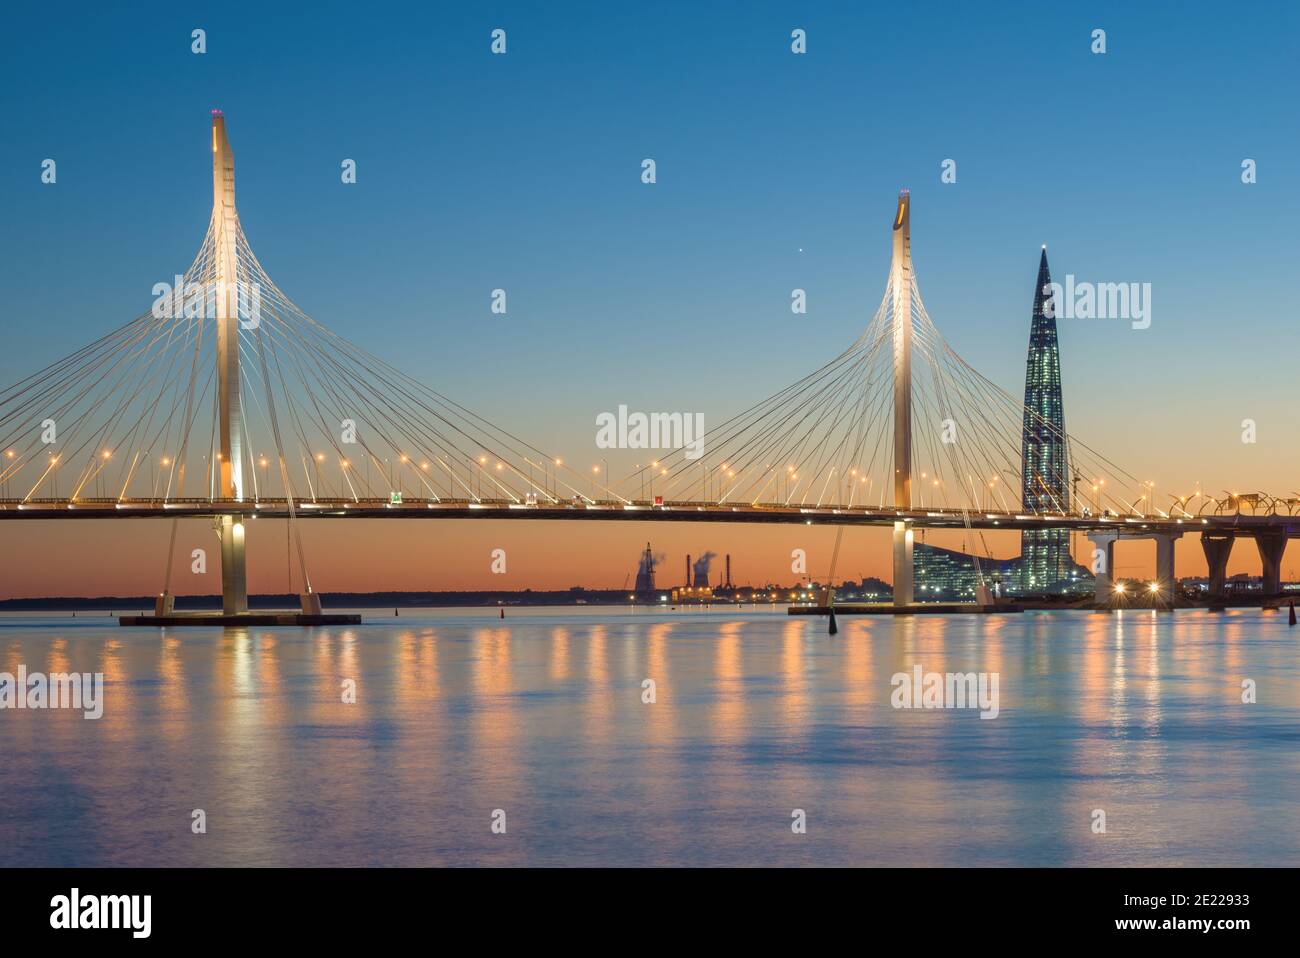 SAINT PETERSBURG, RUSSIA - MAY 29, 2018: Cable-stayed bridge over the Petrovsky fairway and the high-rise building 'Lakhta Center' in the May twilight Stock Photo